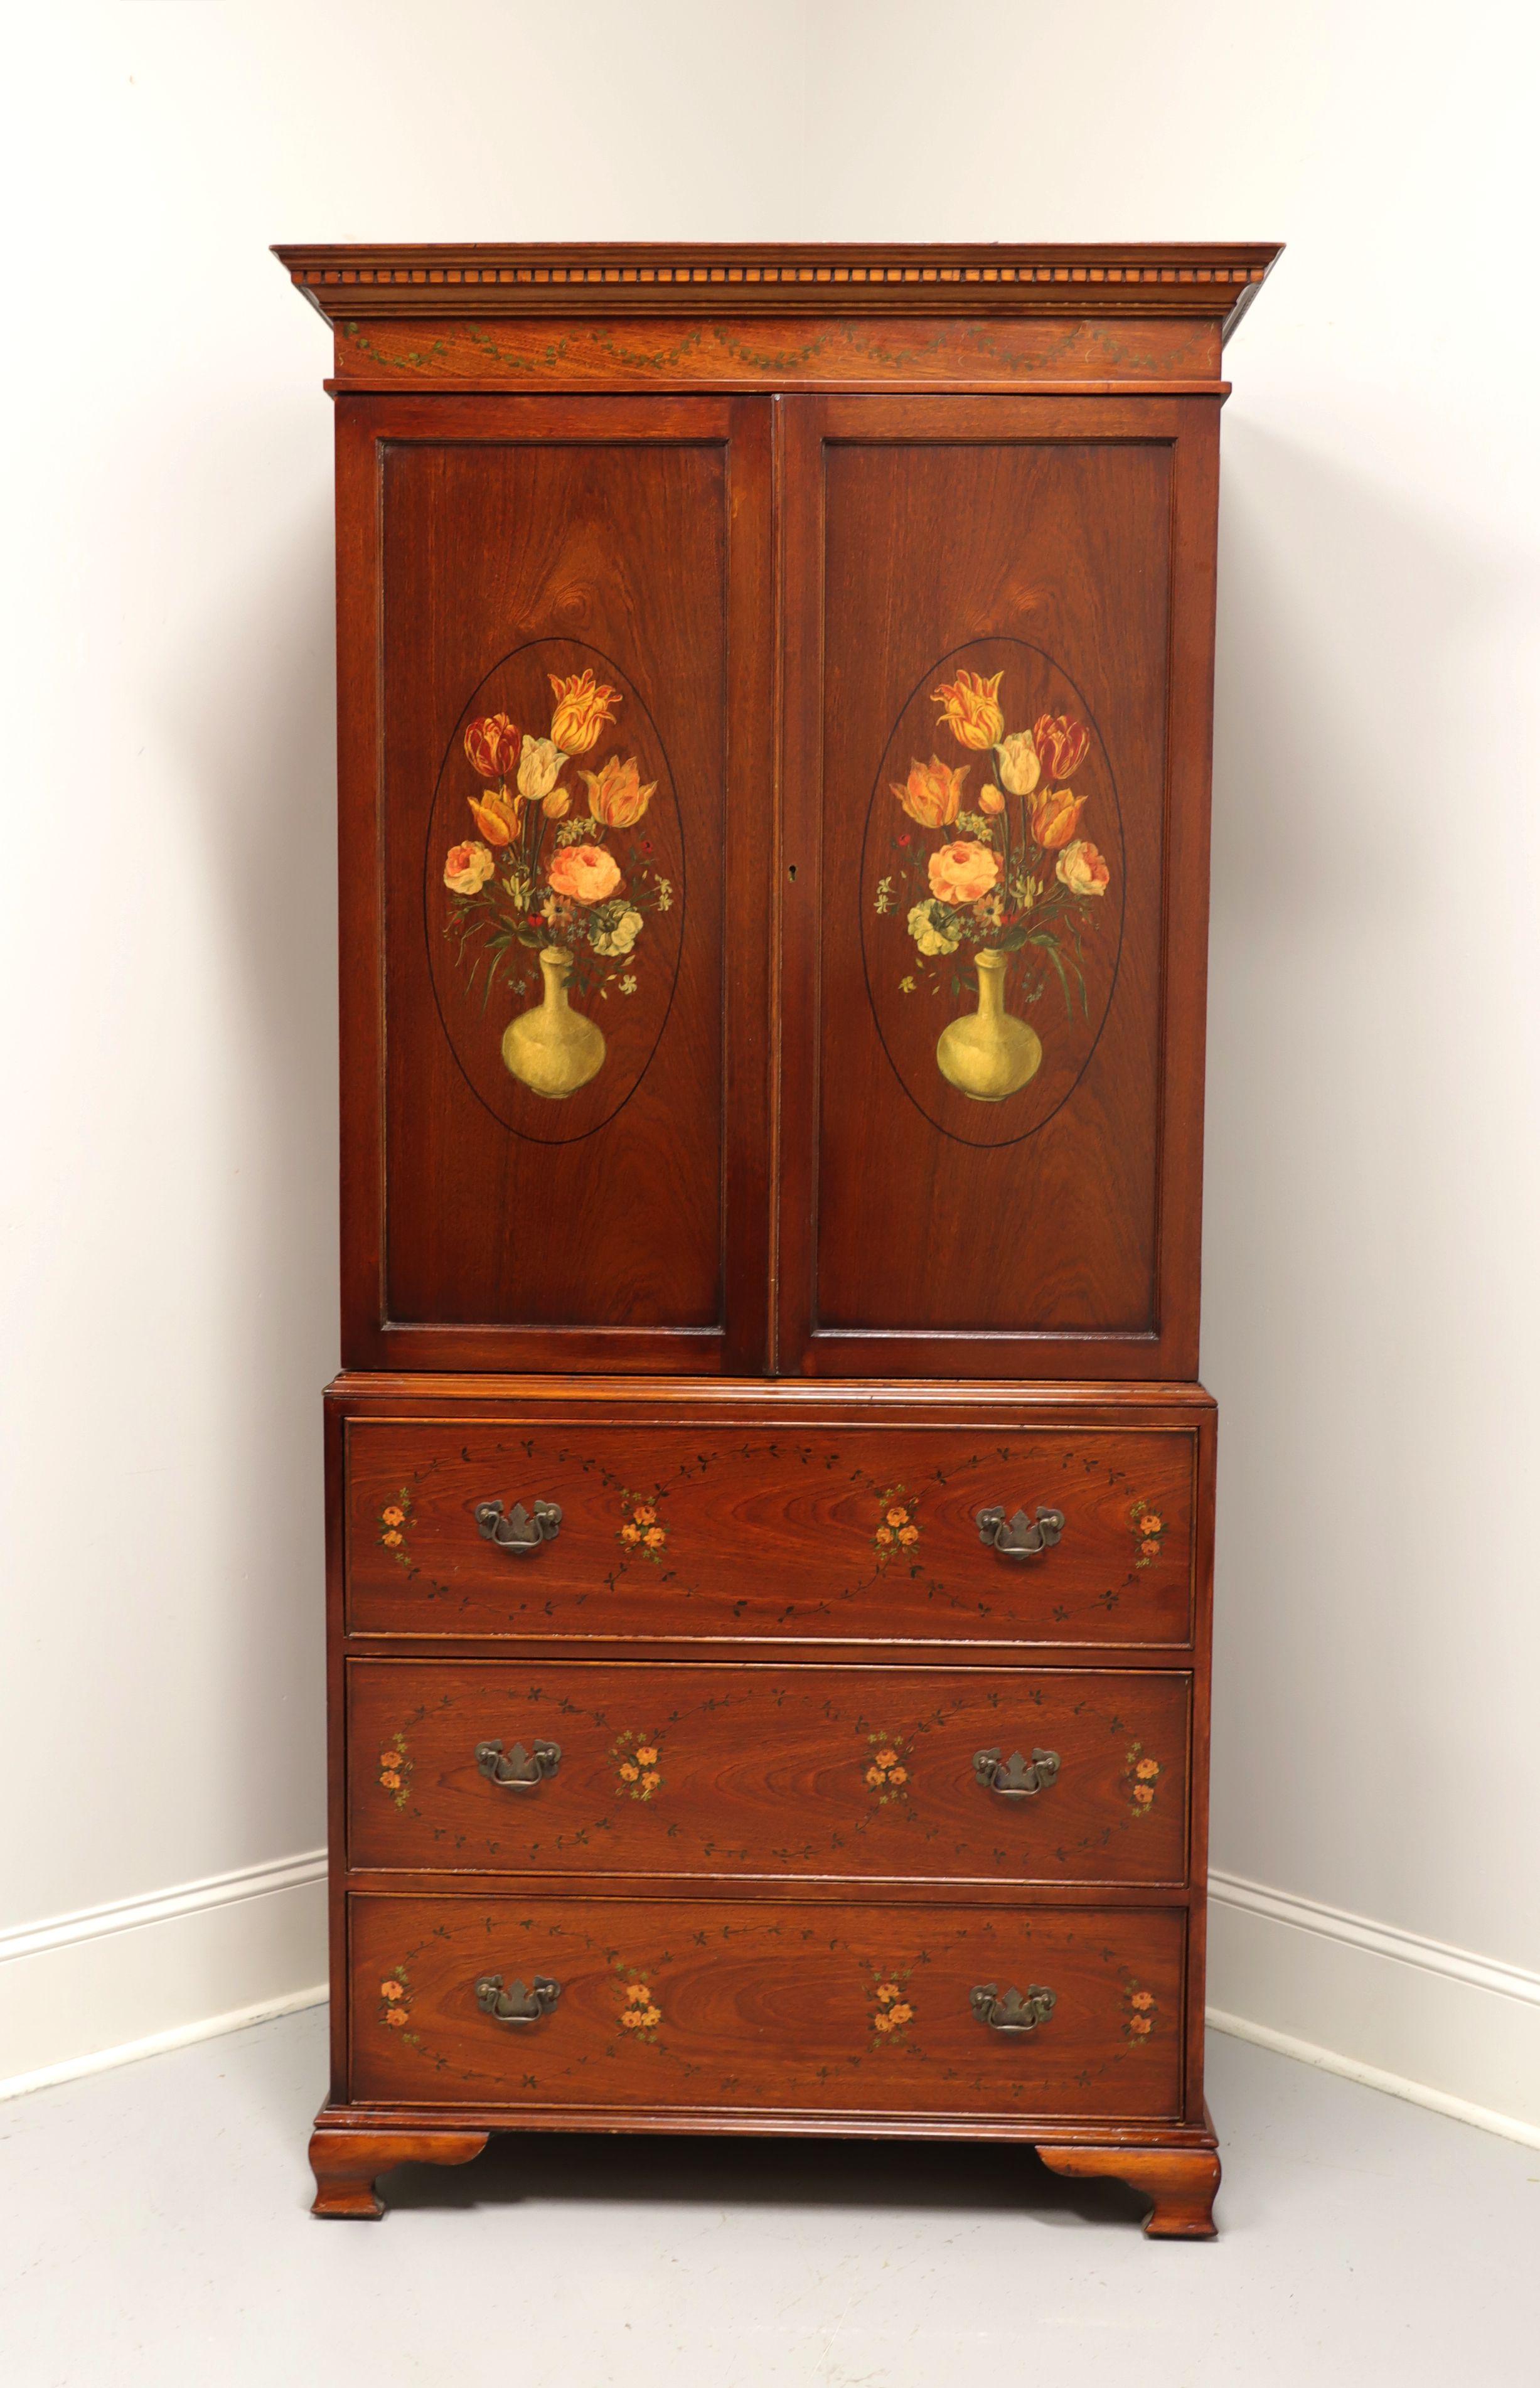 An antique Chippendale style linen press, unbranded. Walnut with brass hardware, ogee bracket feet, crown and dentil molding. Features upper cabinet with hand decorated floral motif double doors with lock, opening to spacious interior with two